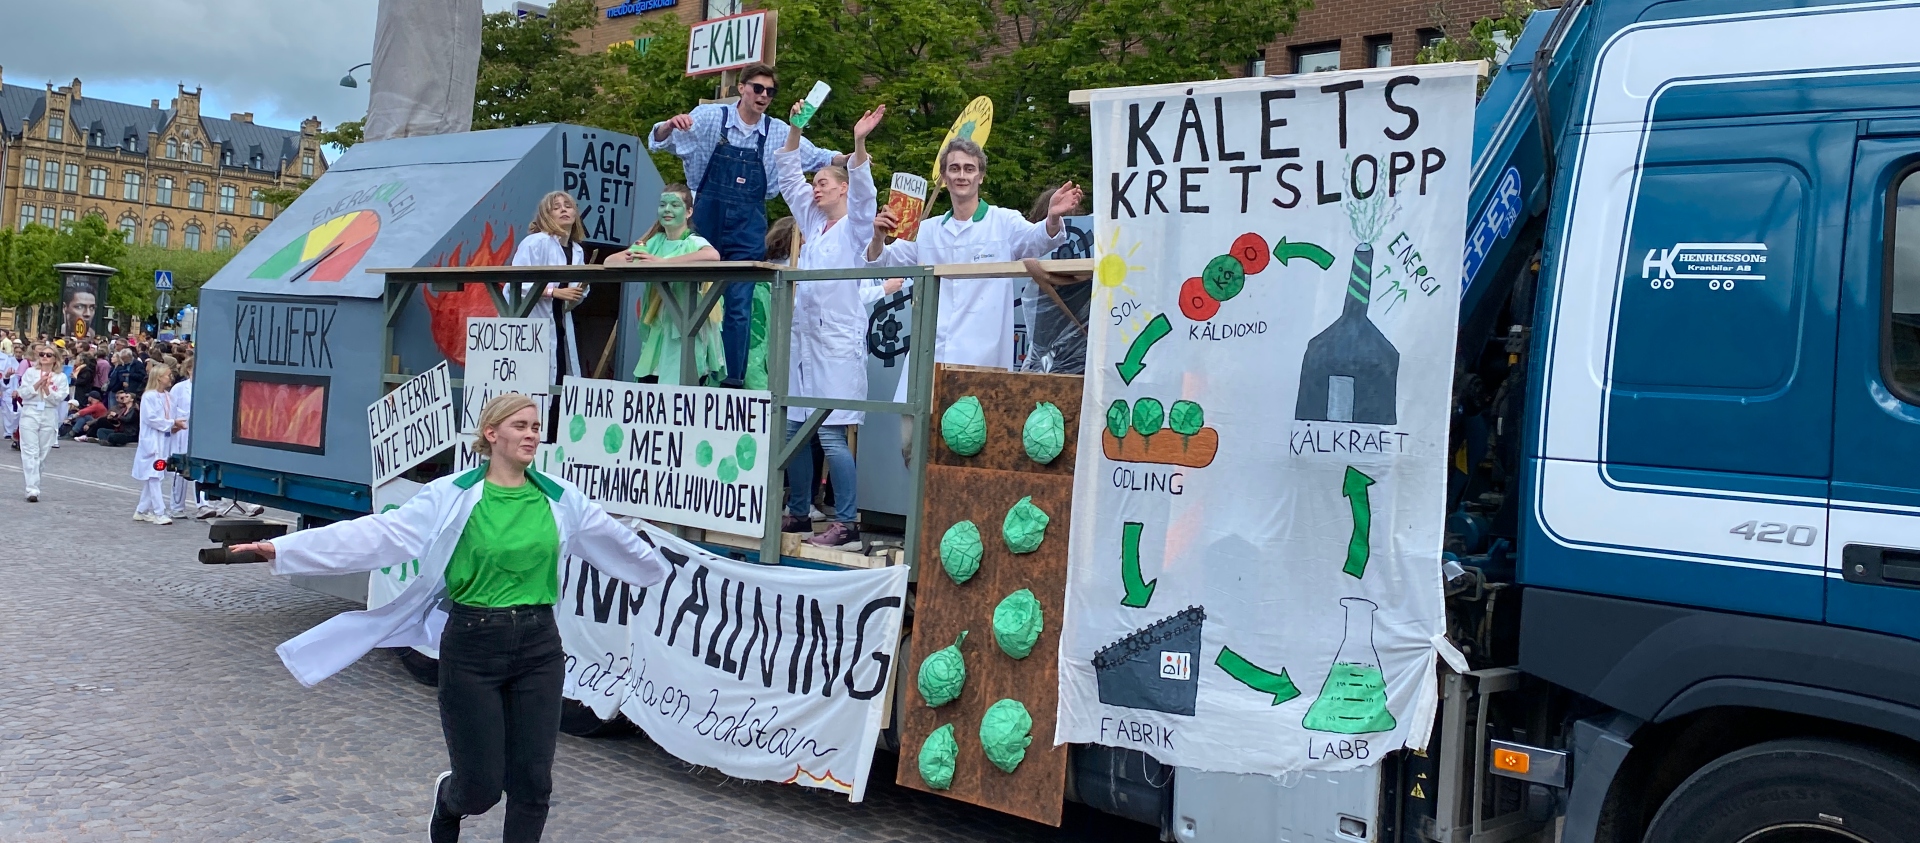 A truck with banners and people